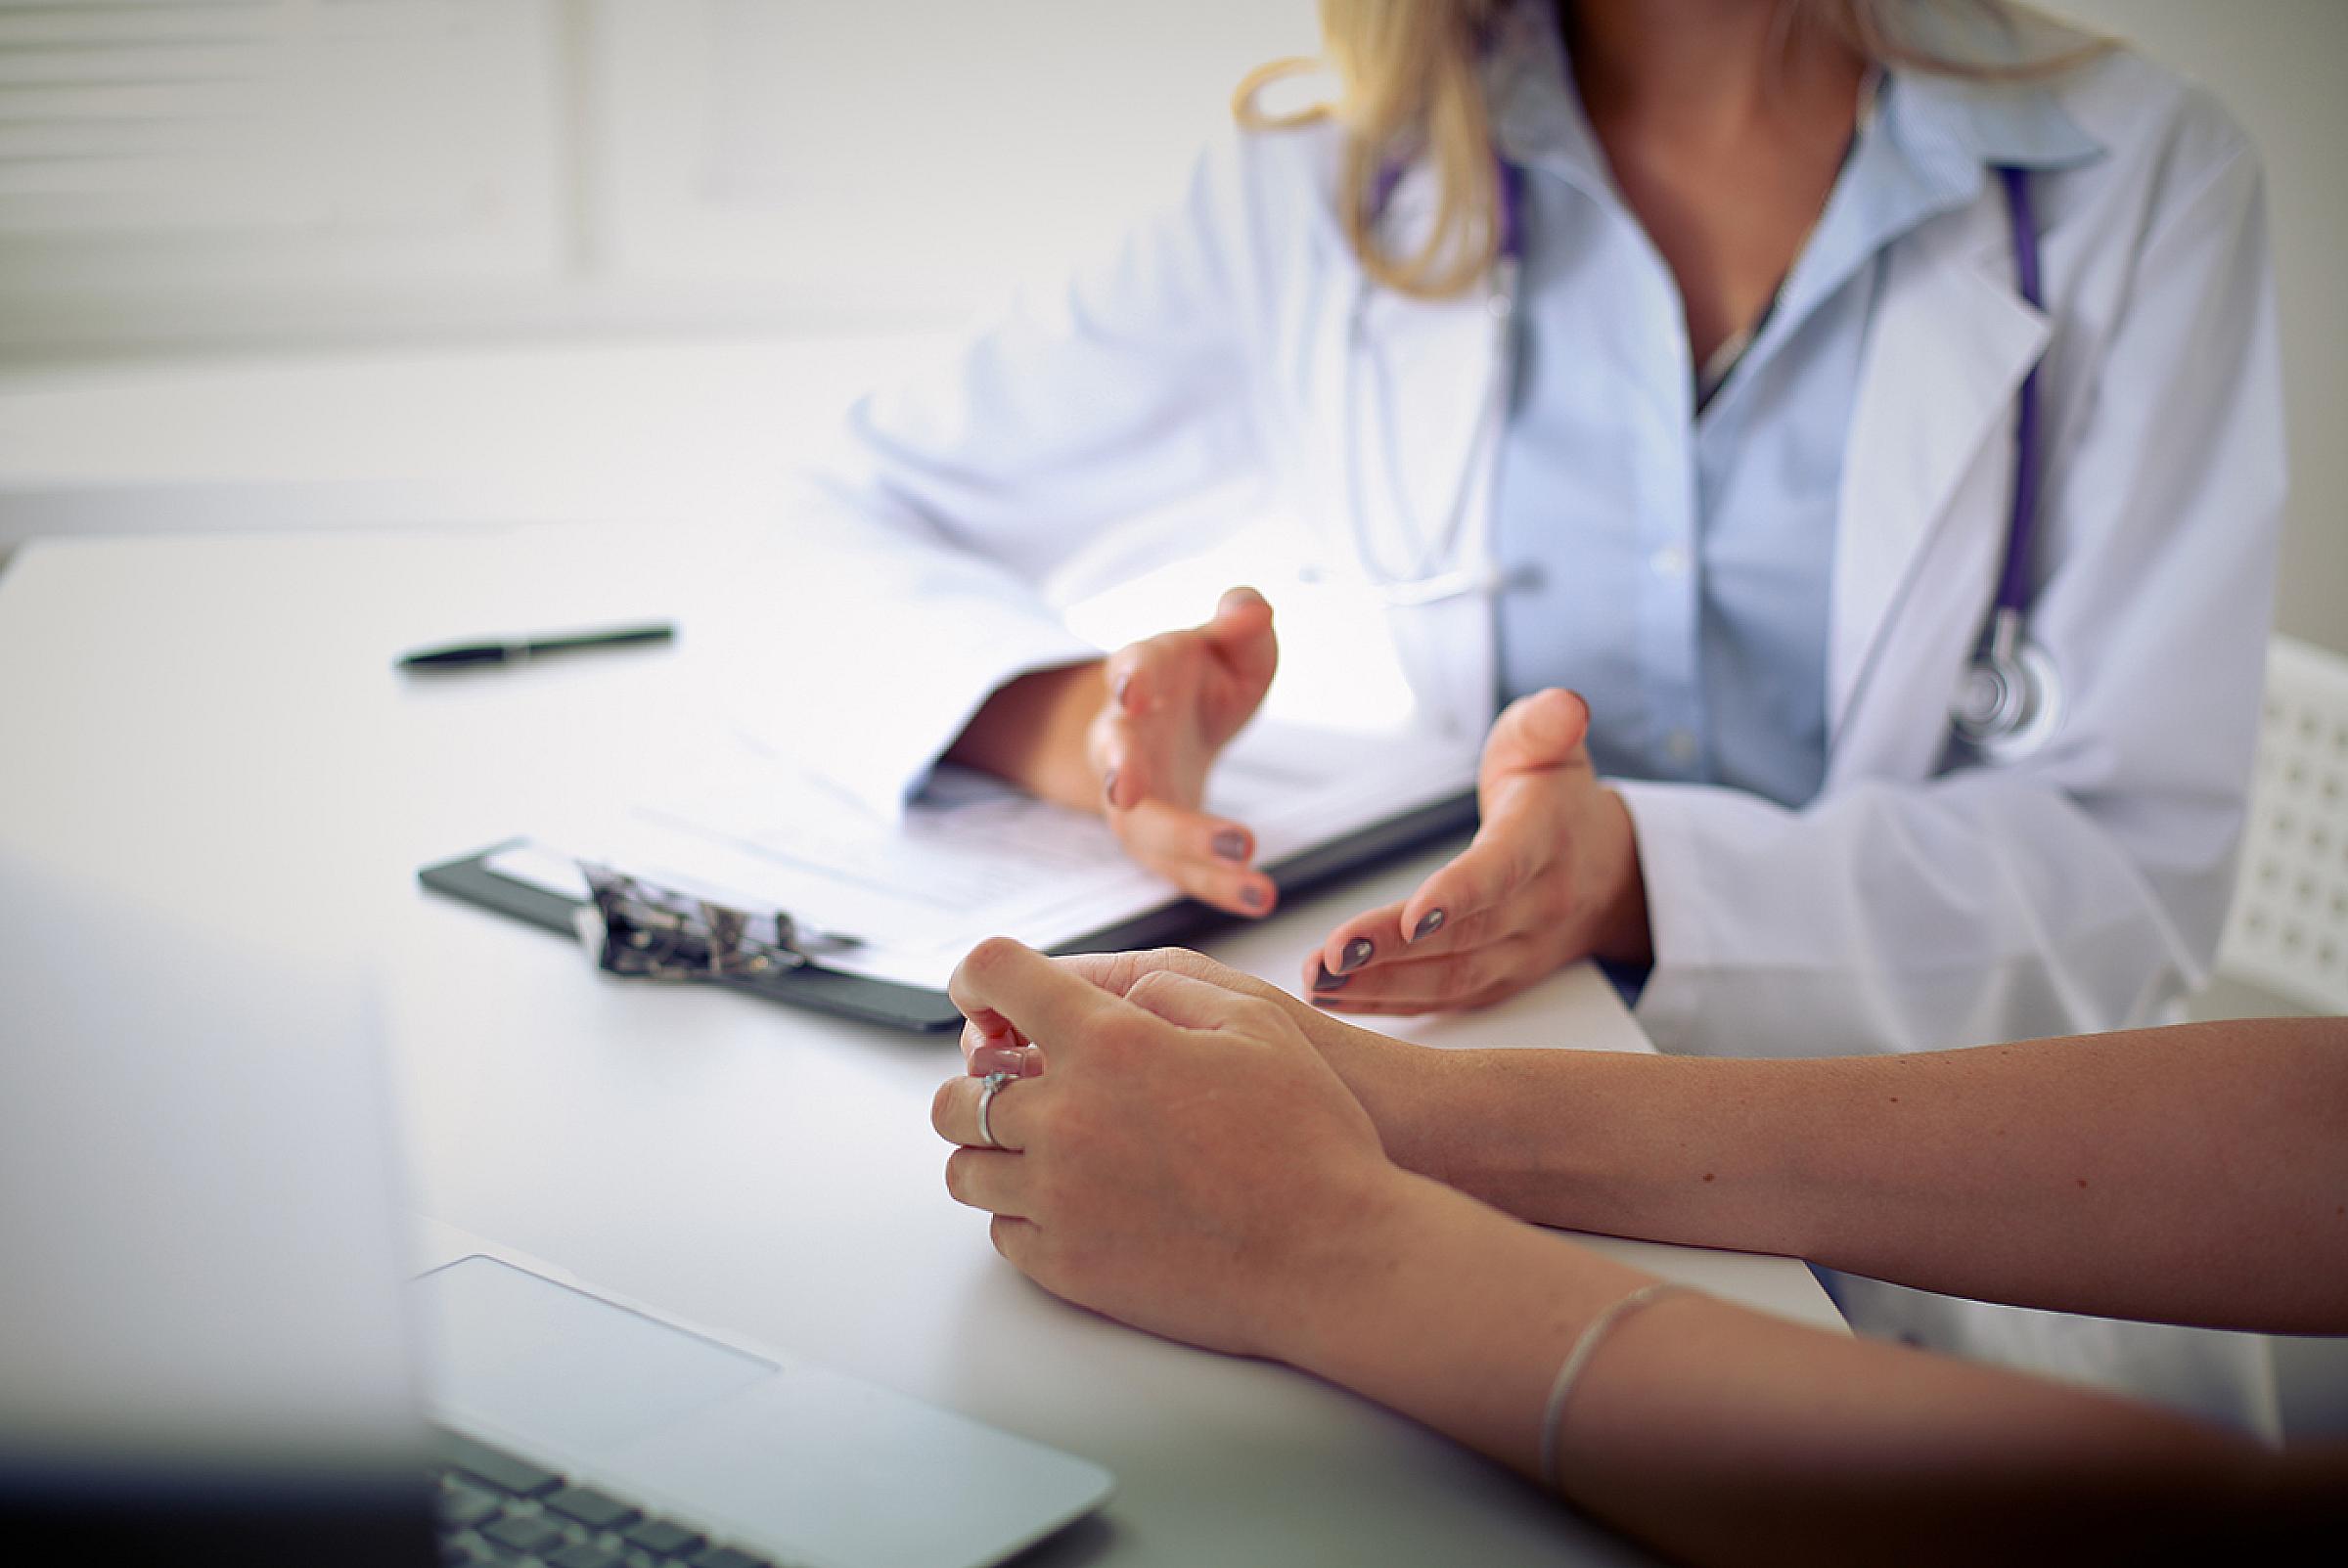 Close up on provider's hands gesturing over a clipboard while patient sits next to them